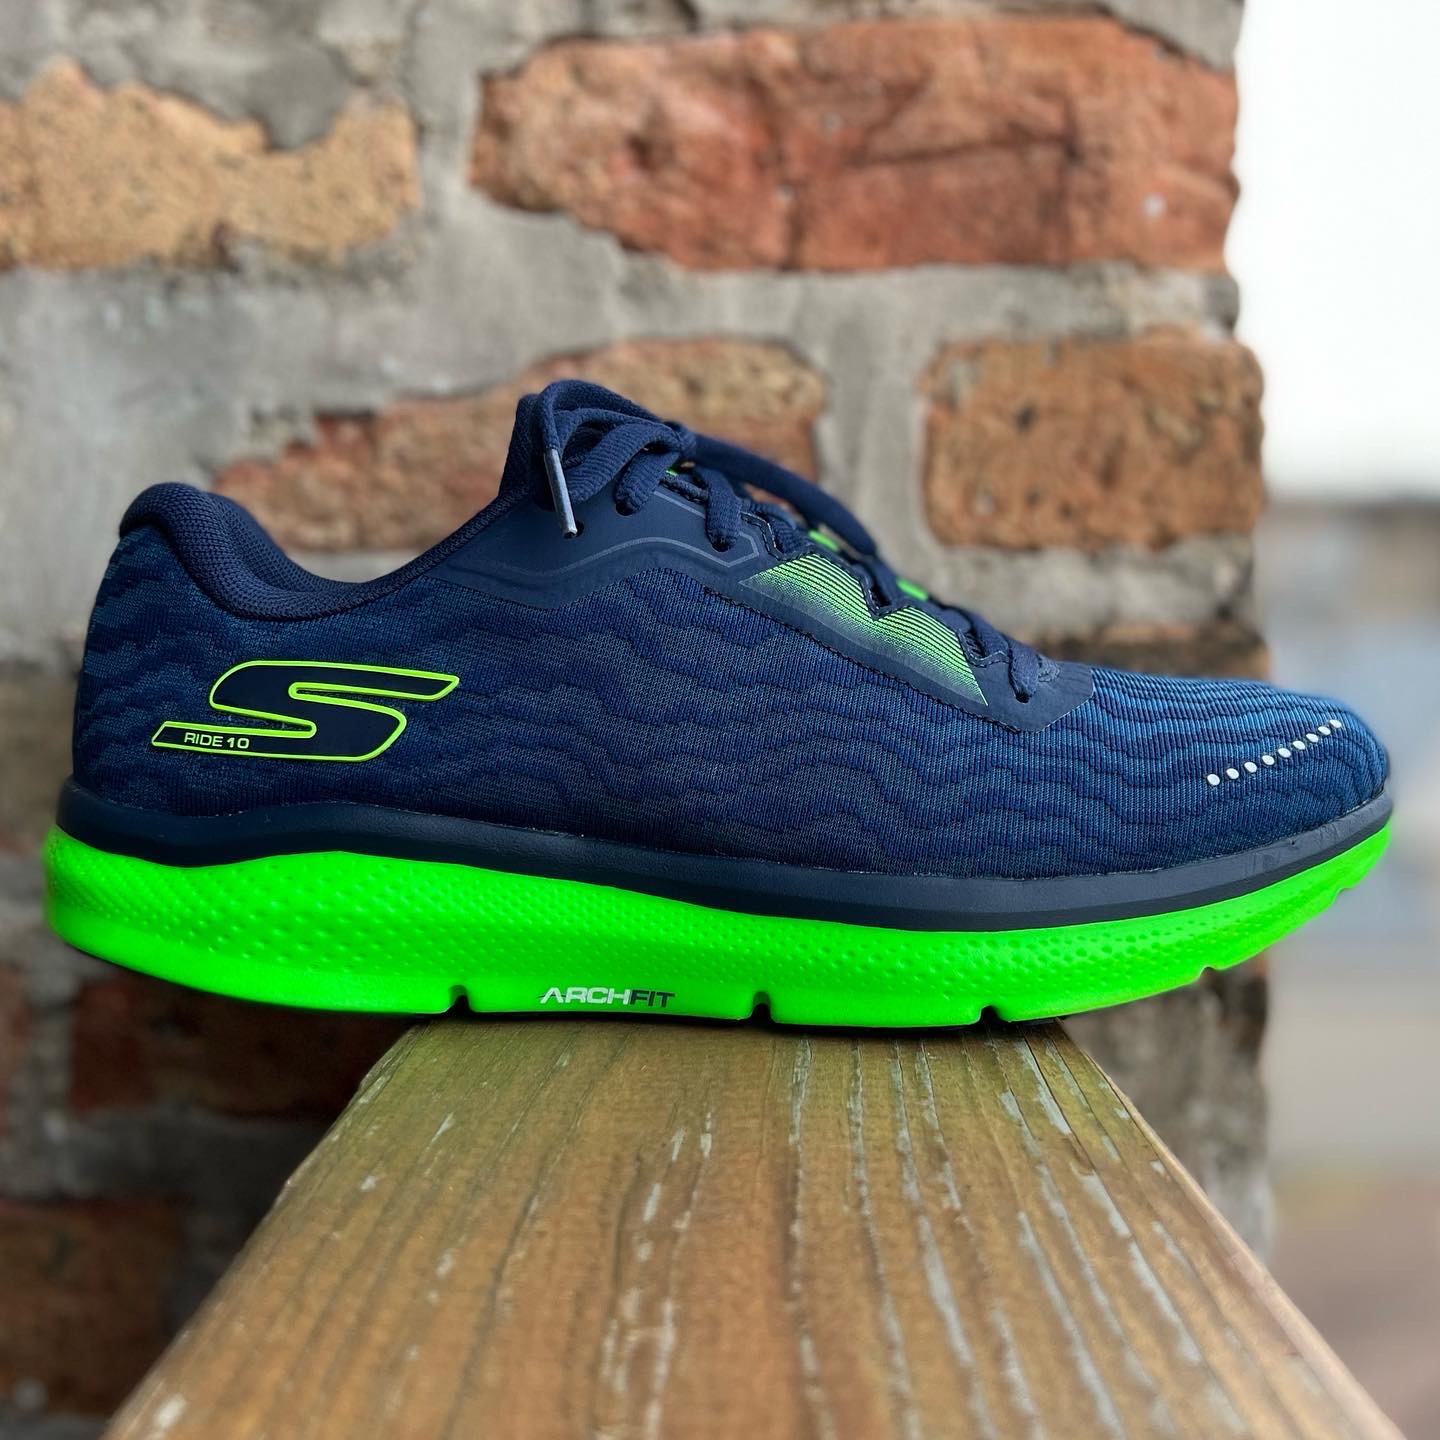 Road Trail Skechers Performance GO Run Ride 10 Multi Tester at 50 Miles Plus: Pleasant Light Everyday Trainer